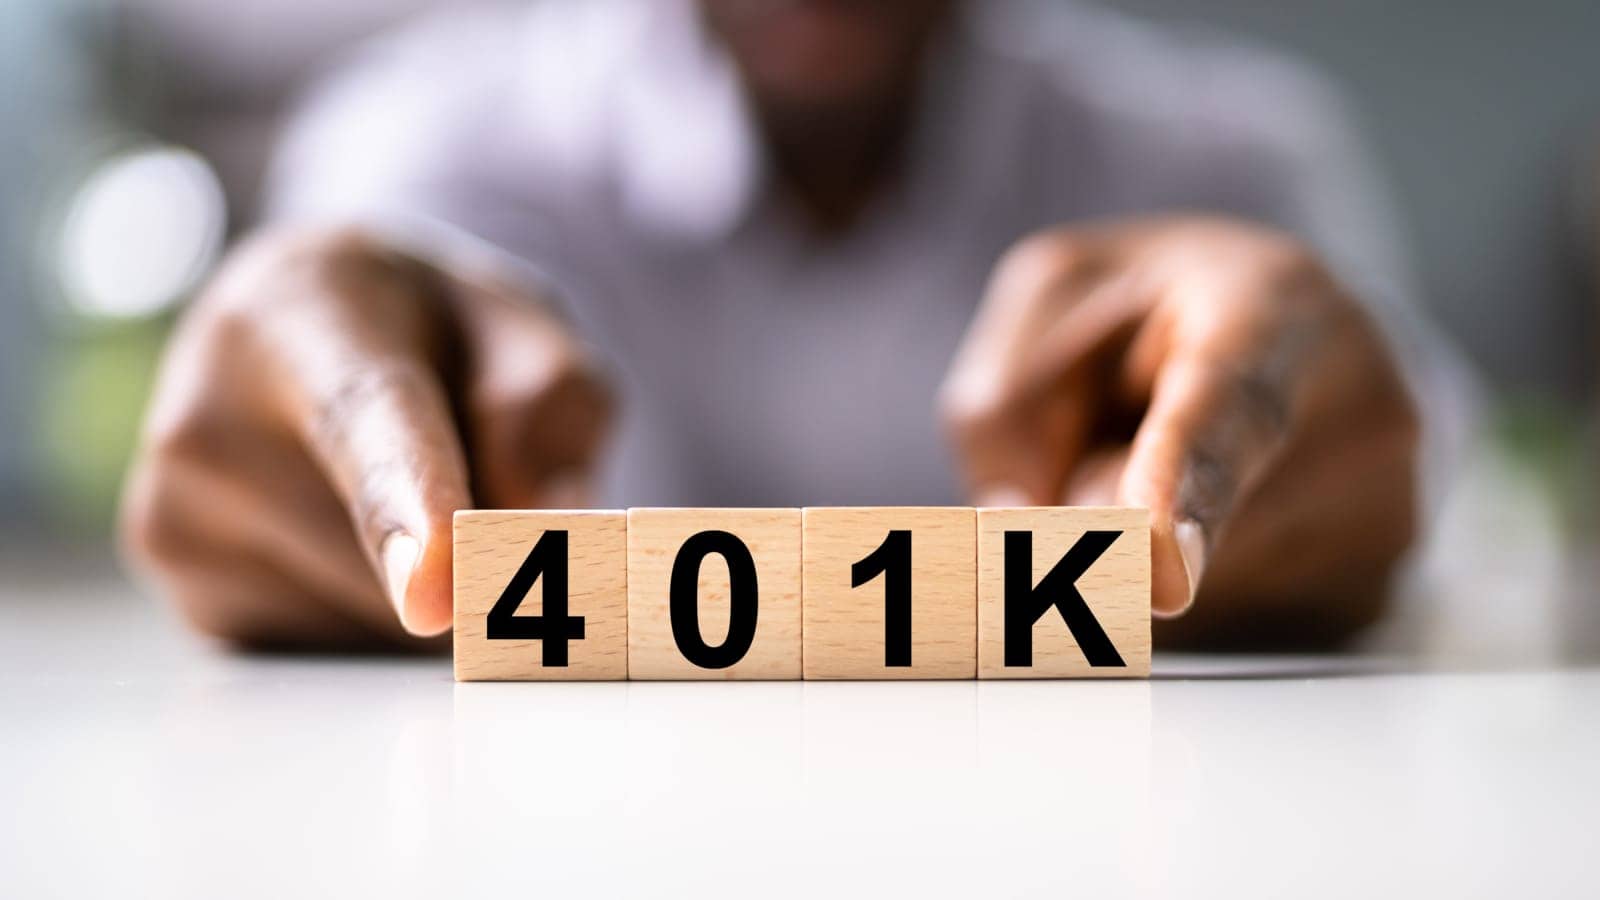 Man with 401k Blocks in front of fingers